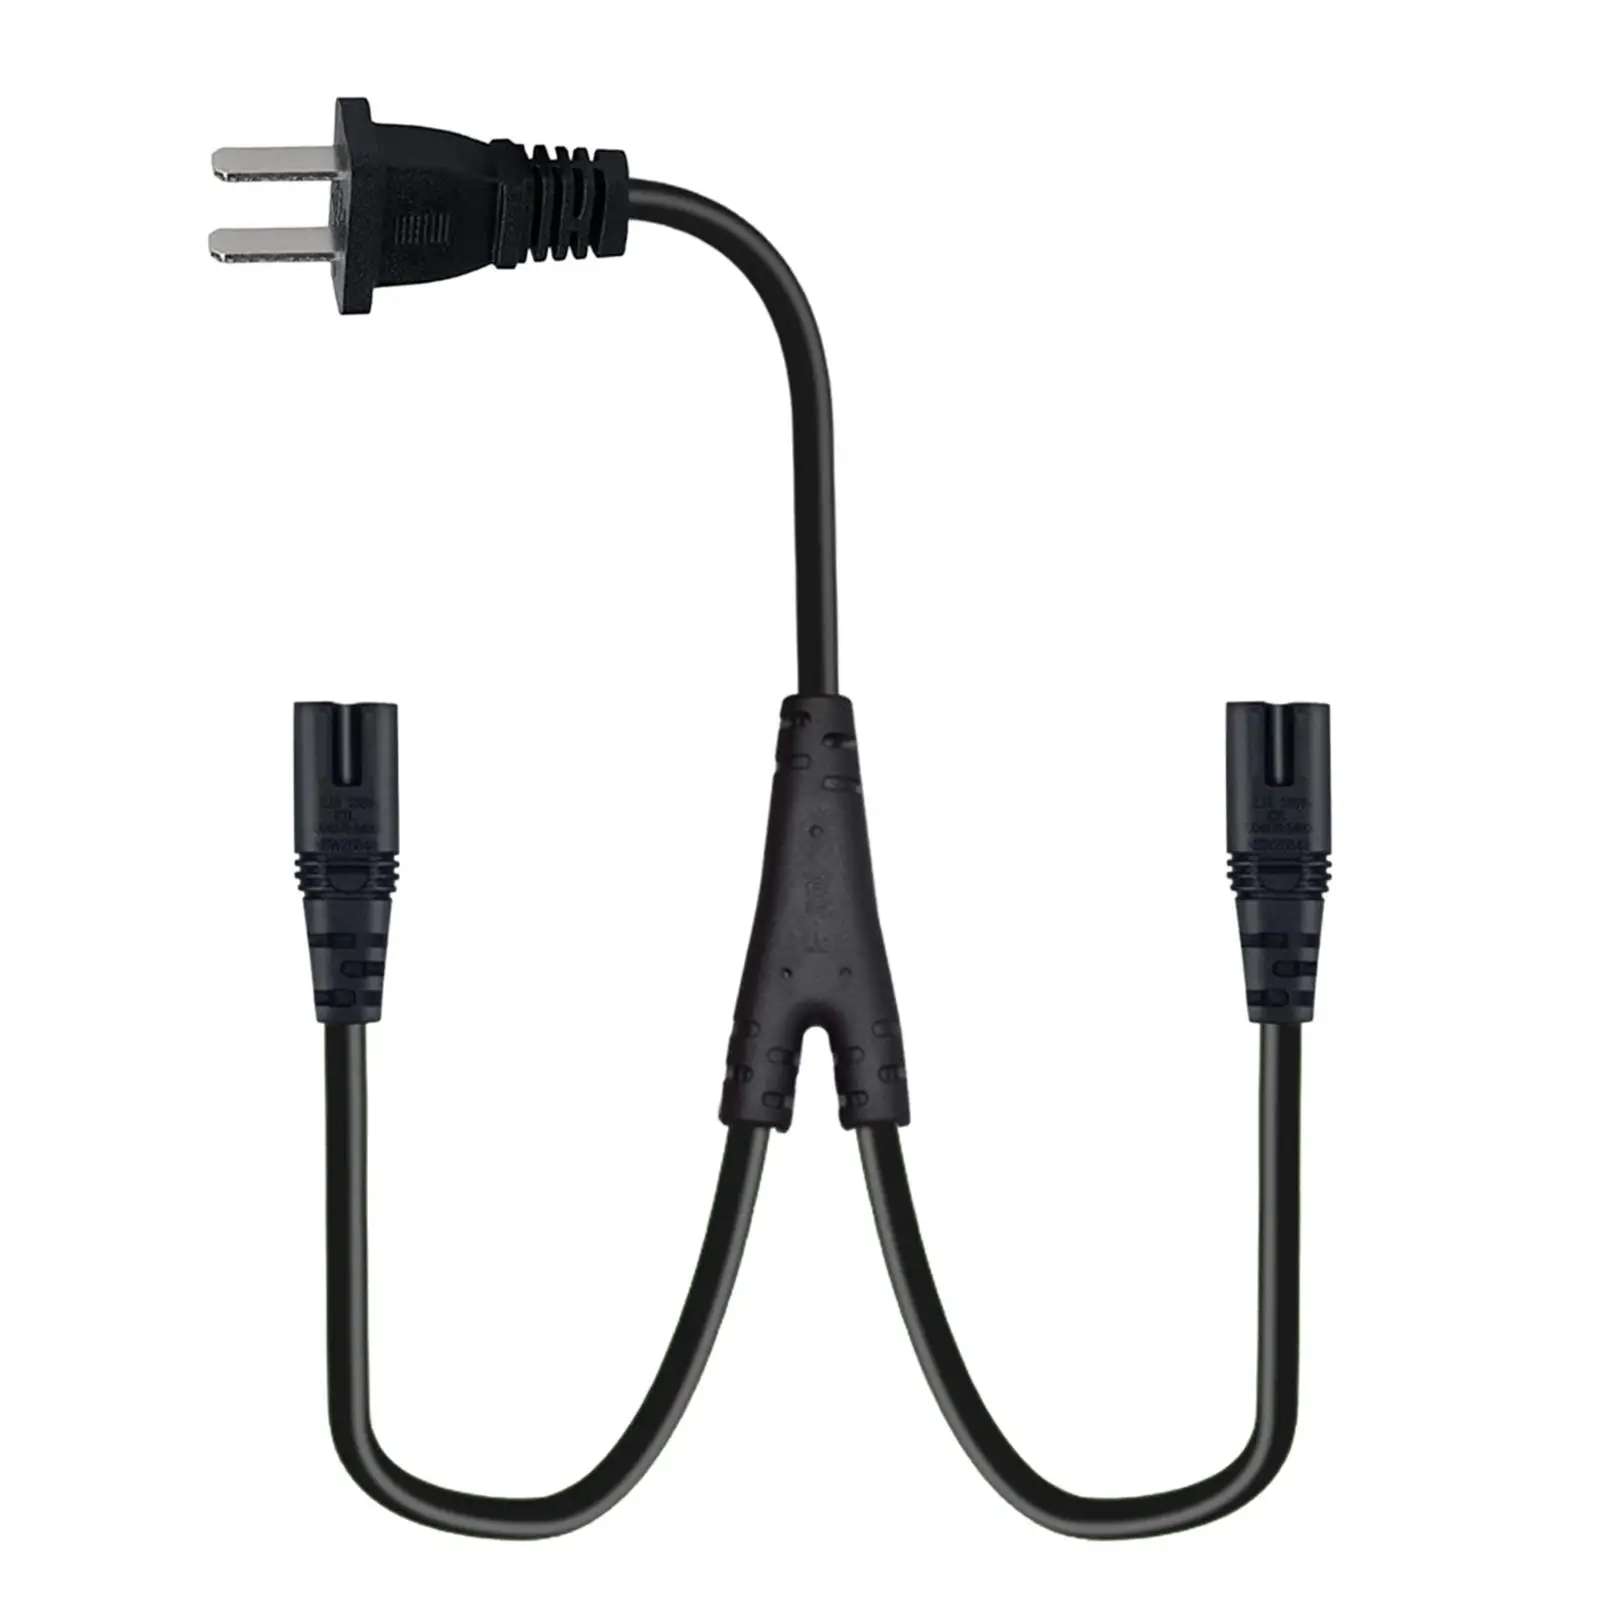 2 Straight Pins Connector to C7 Power Cord Cable 180cm Accessories ,Black Direct Replaces